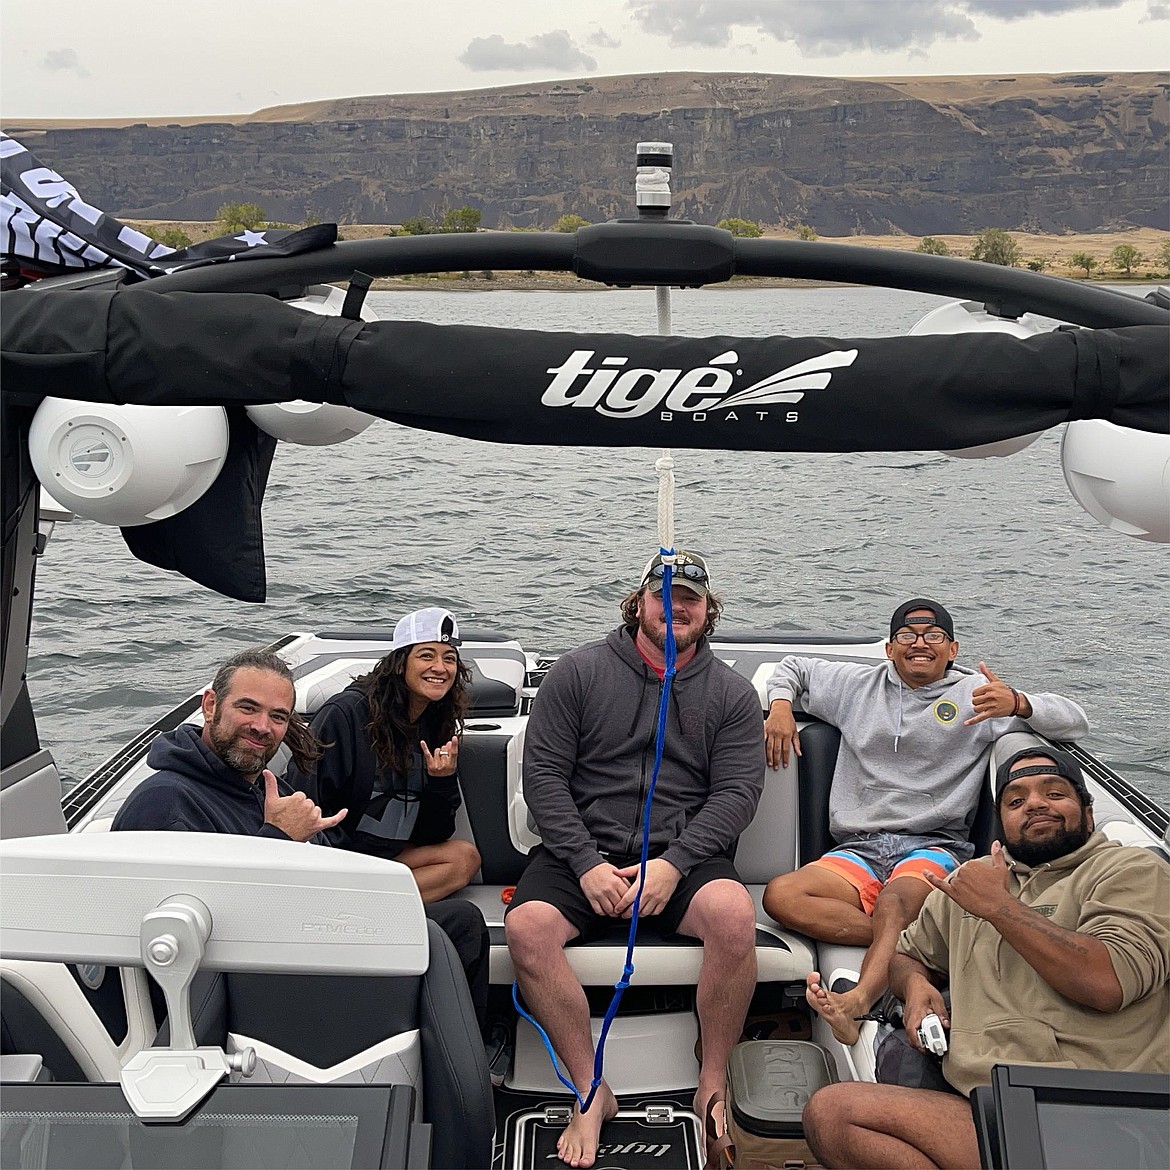 The event is only possible due to volunteers and donations as Wake For Warriors does not own any boats in the Pacific Northwest for their events, organizers said. Strong community support has allowed the local event to be successful for years now.